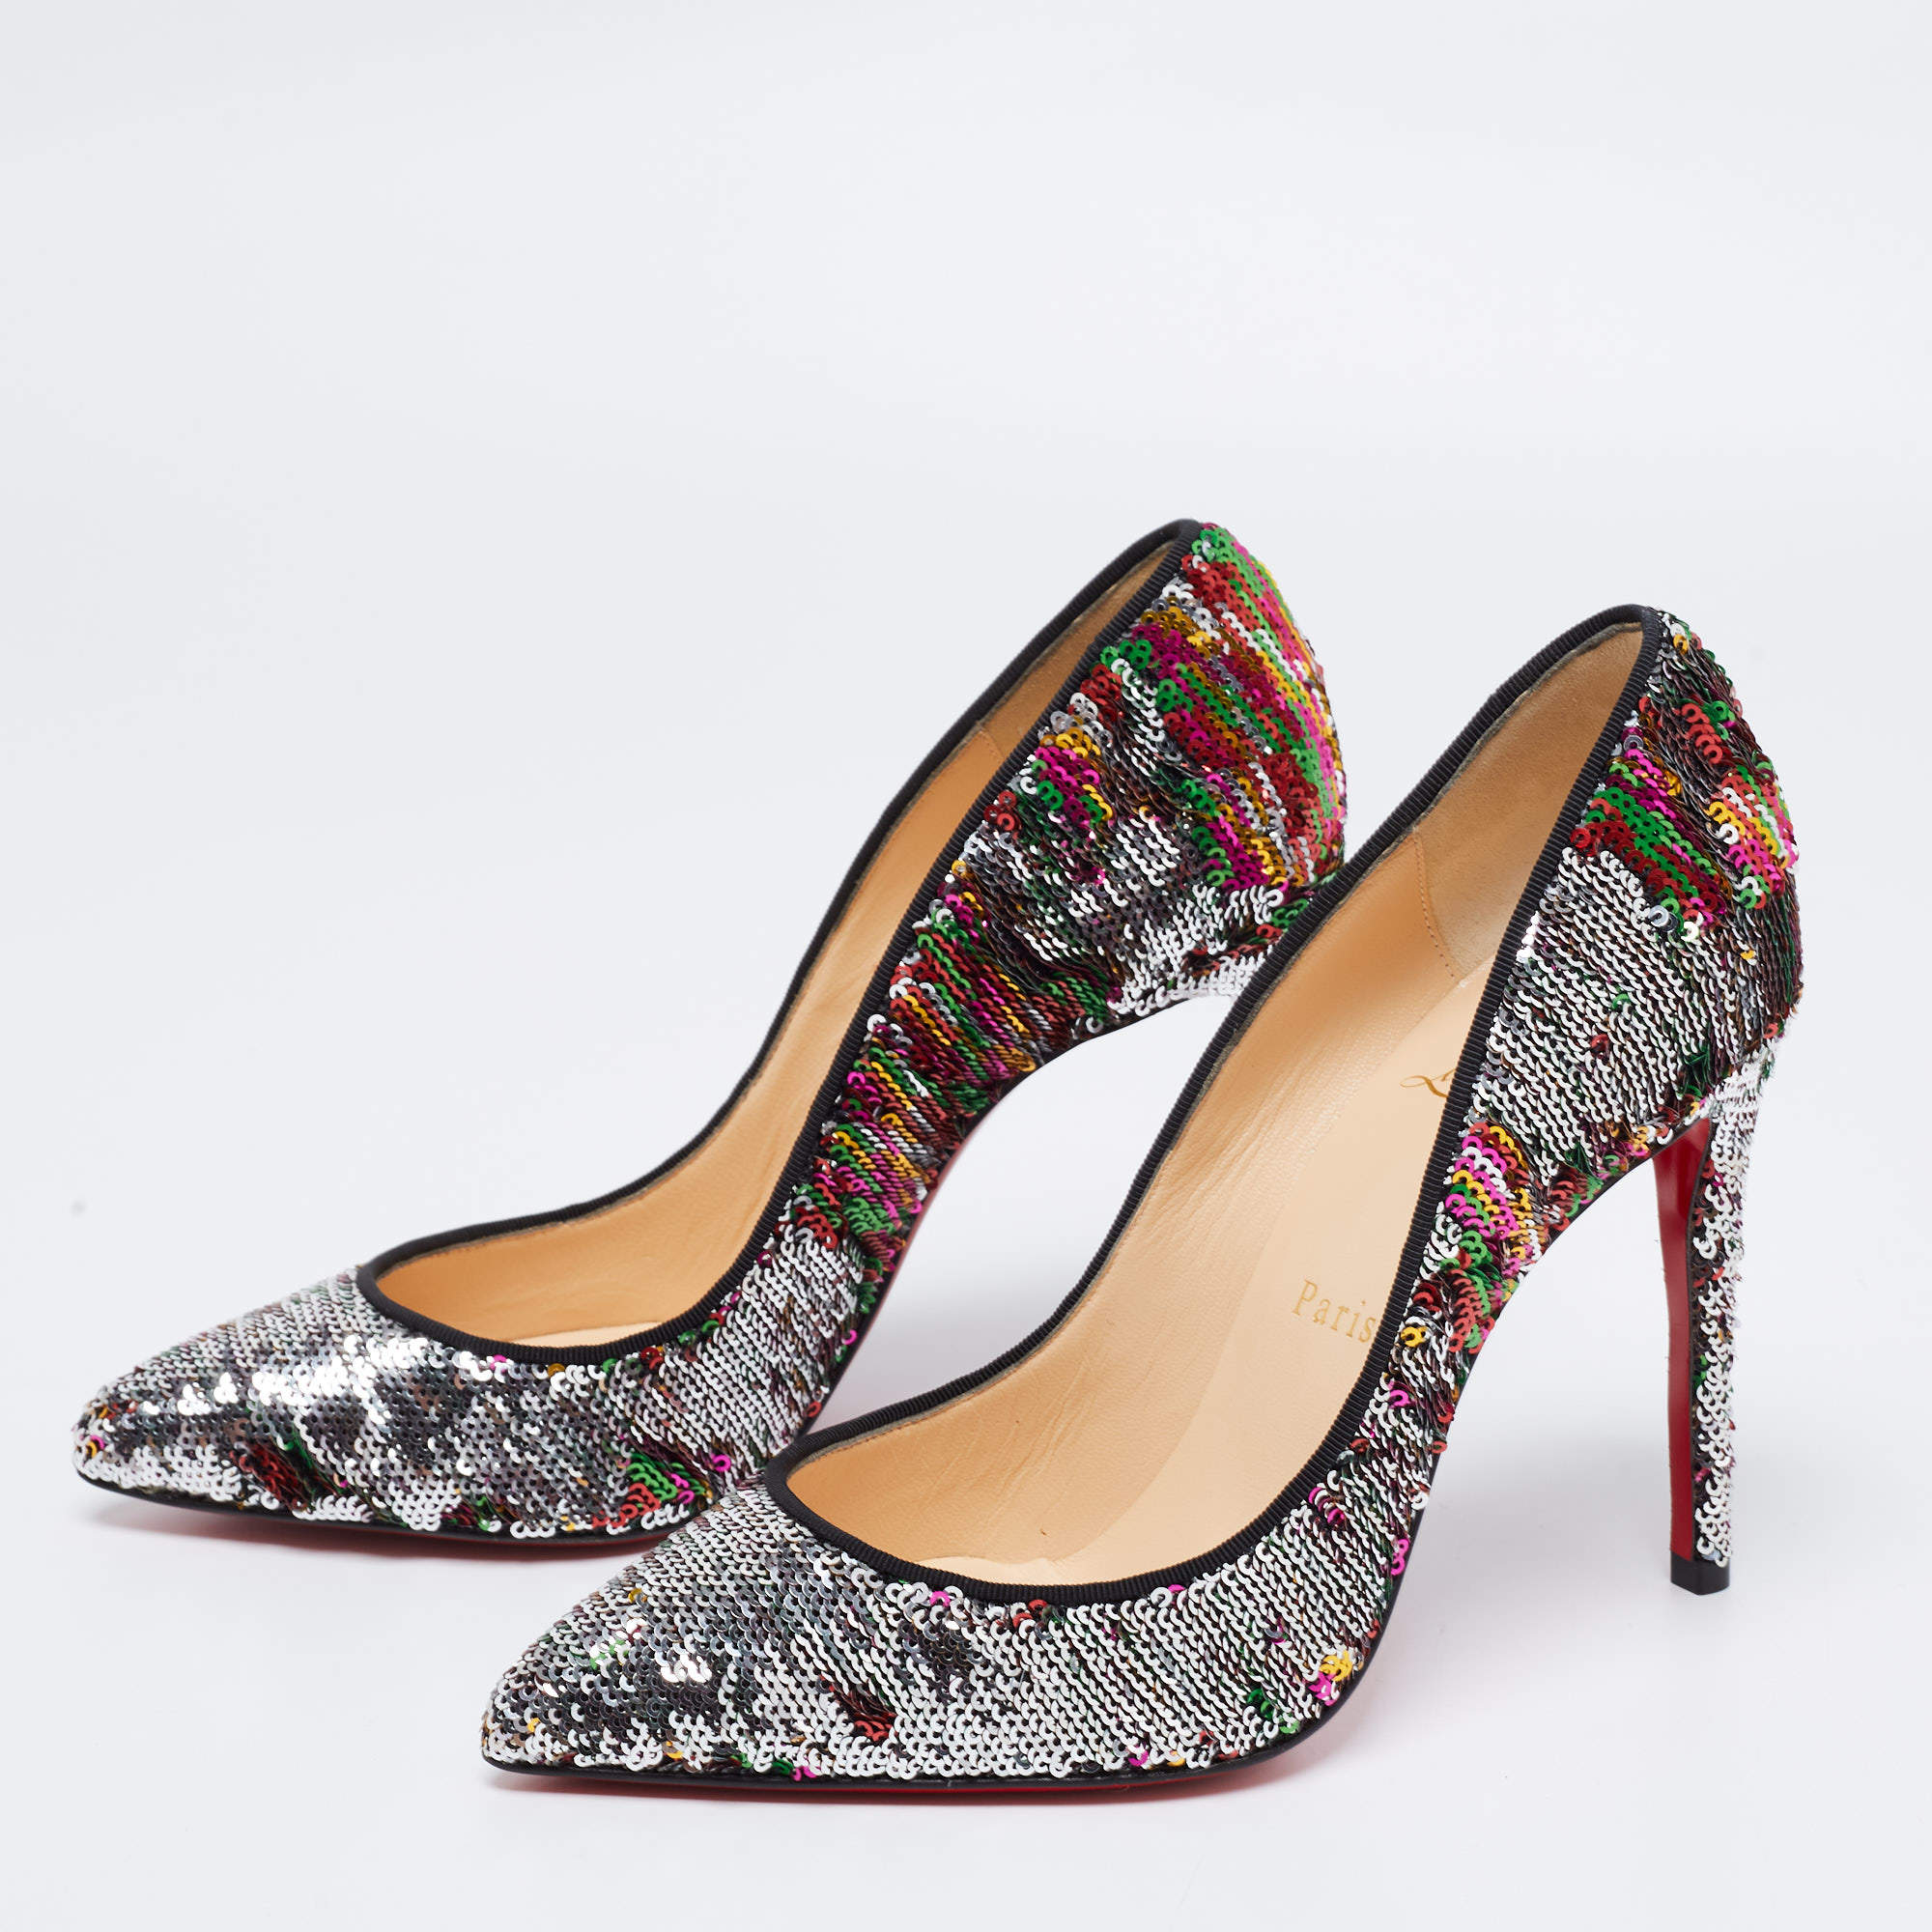 Christian Louboutin Multicolor Leather Pigalle Strass Degrade Pumps Size 36  Christian Louboutin | The Luxury Closet